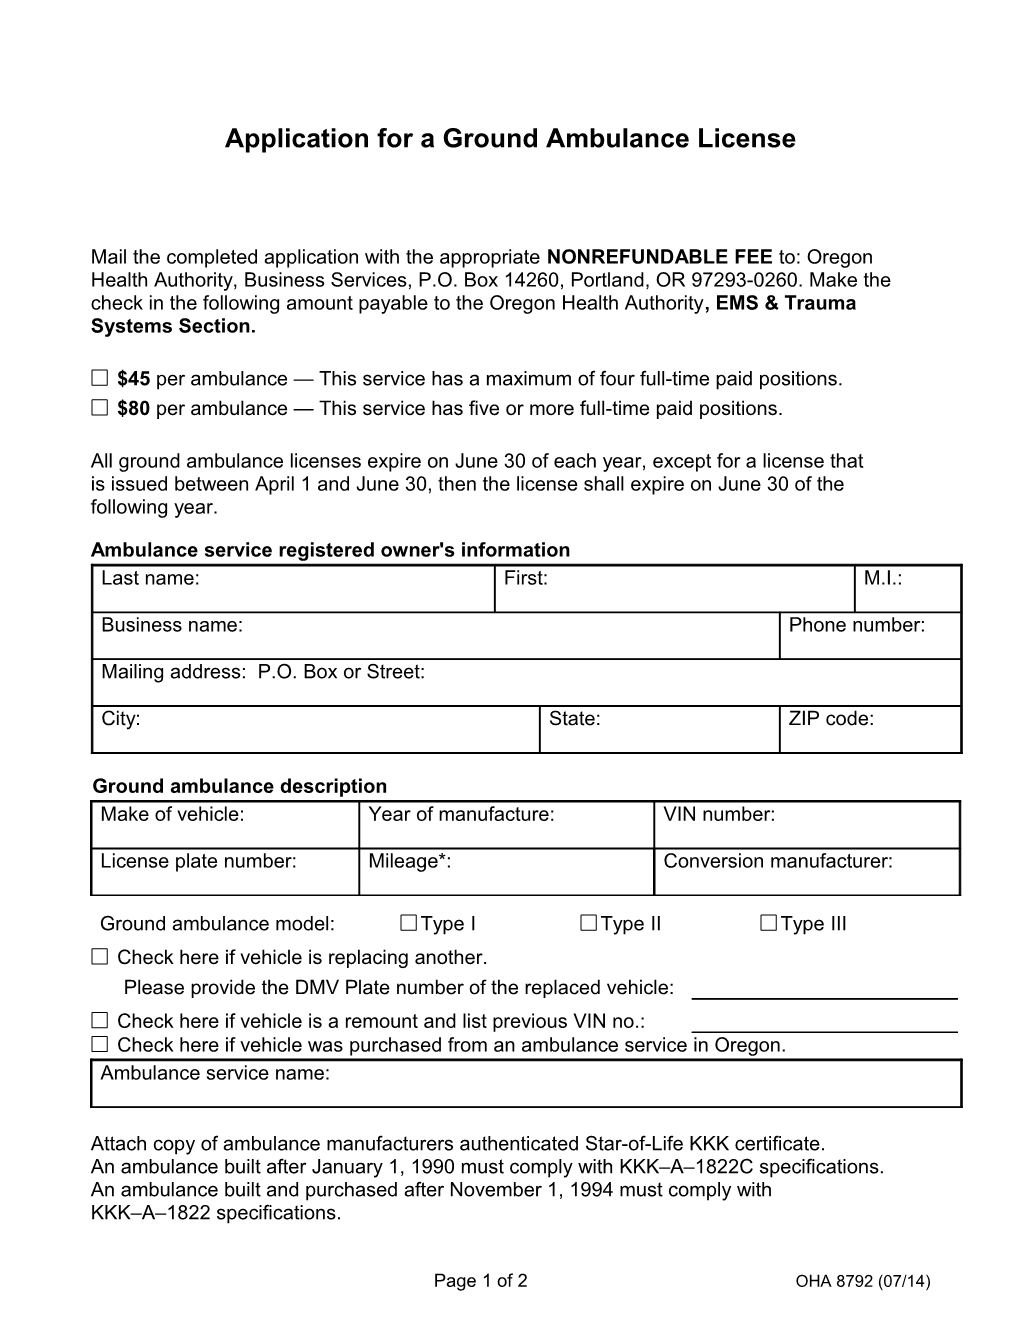 Application for a Ground Ambulance License OHA 8792 12/11